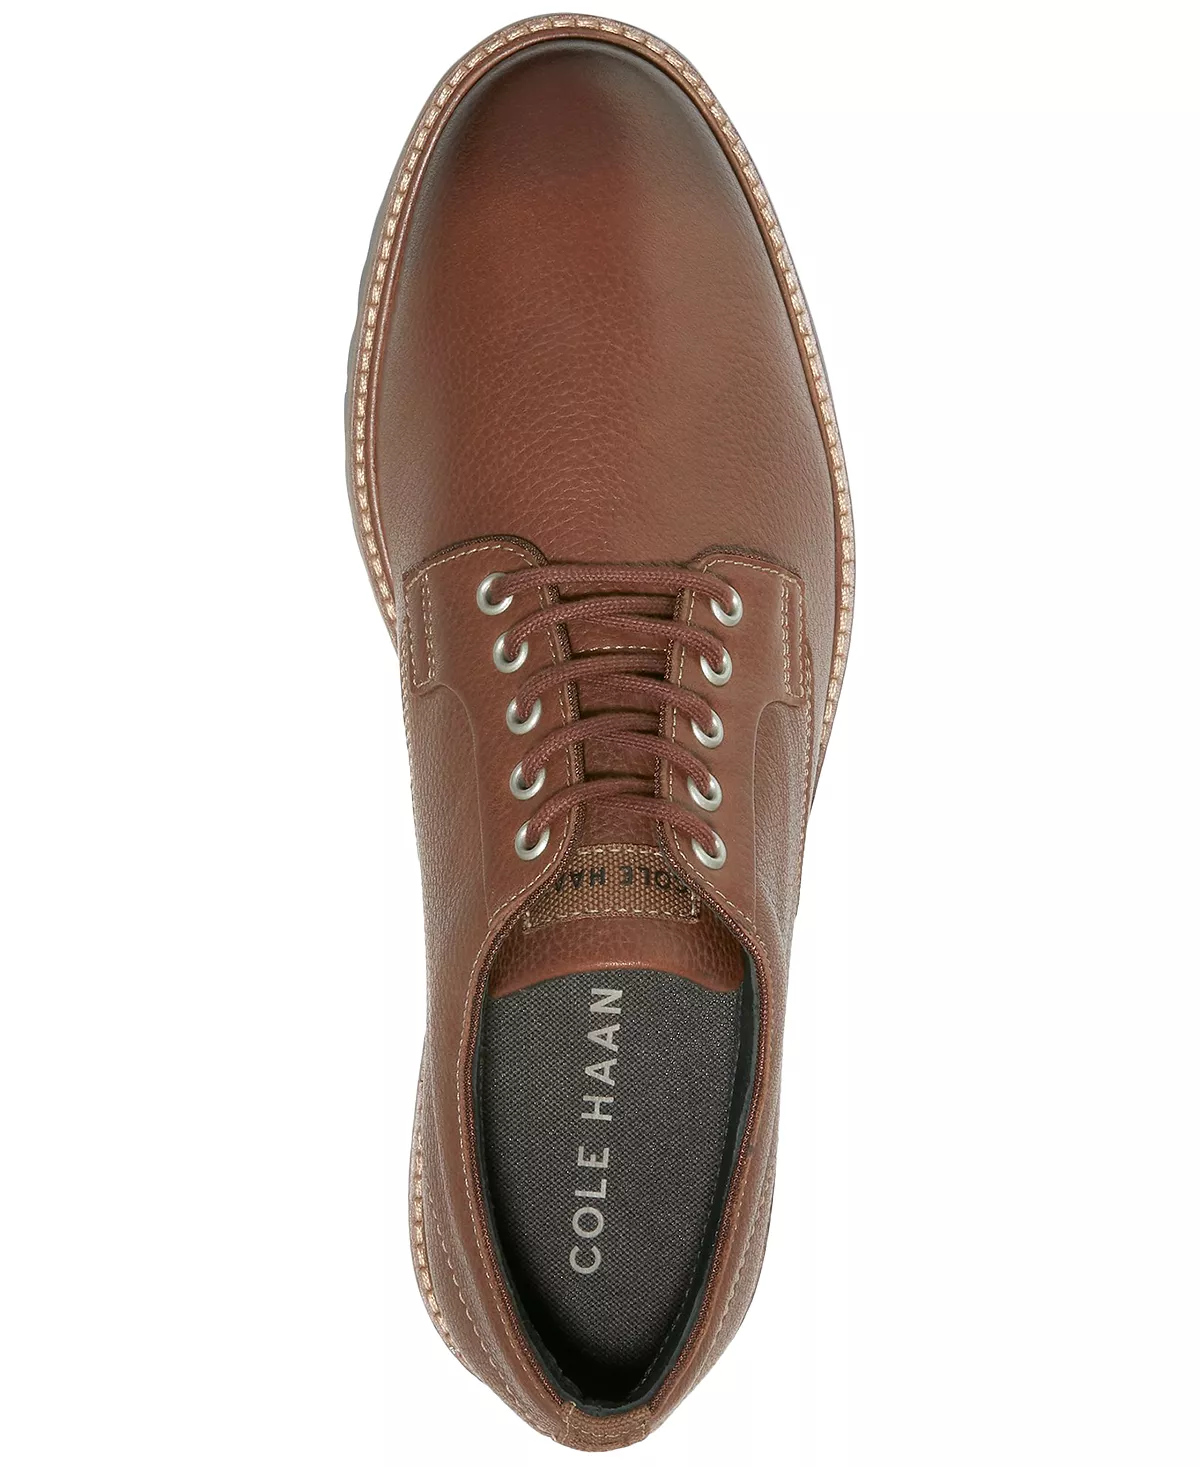 Pin on Men's Shoes